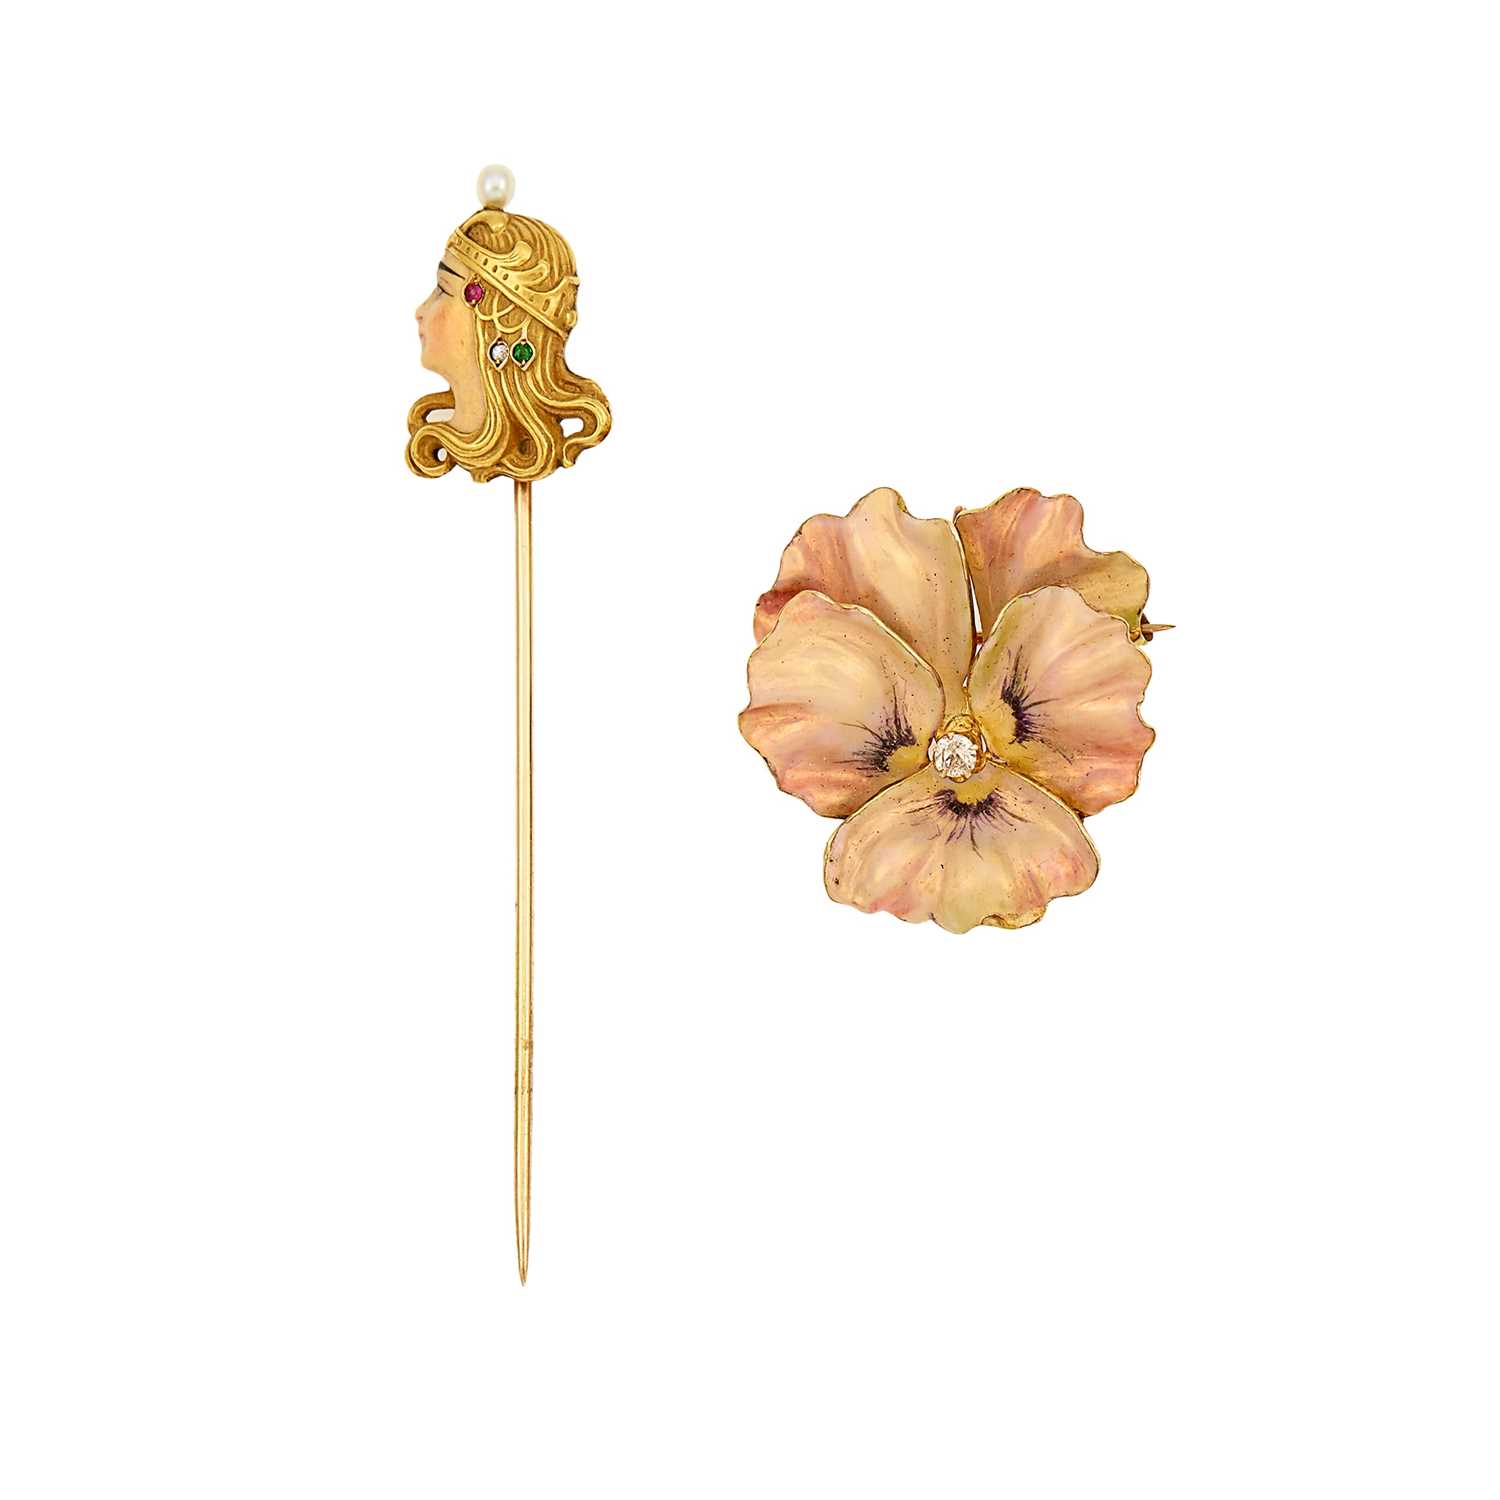 Lot 1145 - Antique Gold, Enamel and Gem-Set Queen's Head Stick Pin and Pansy Pin